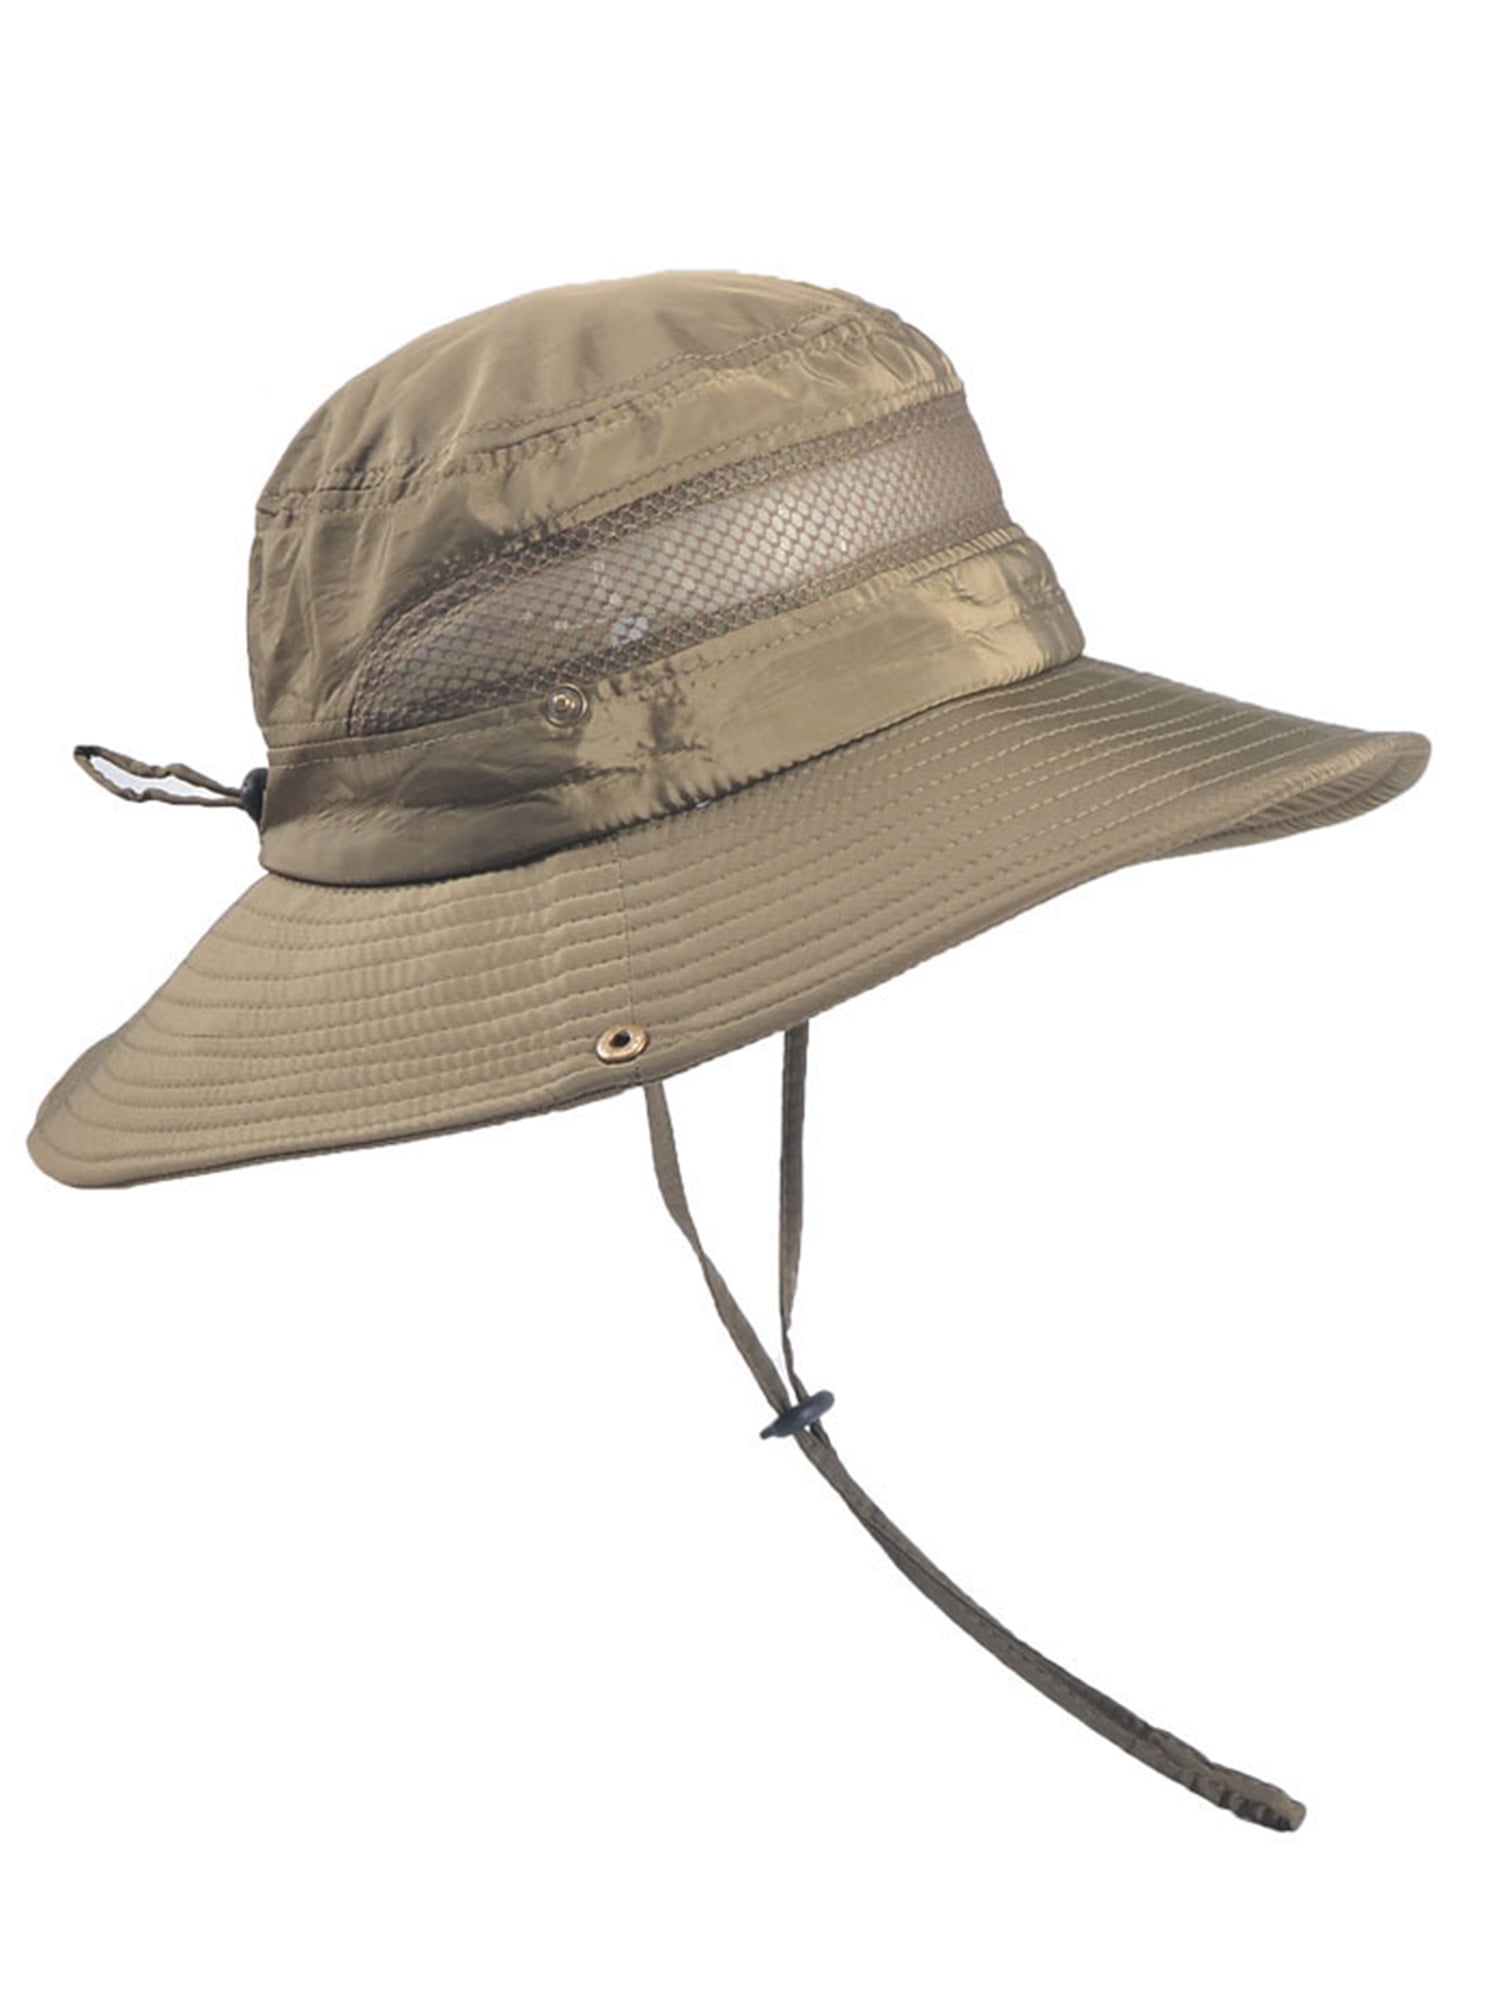 Diconna New Summer Mens Sun Hat Bucket Fishing Hiking Cap Wide Brim Uv Protection Hat Other